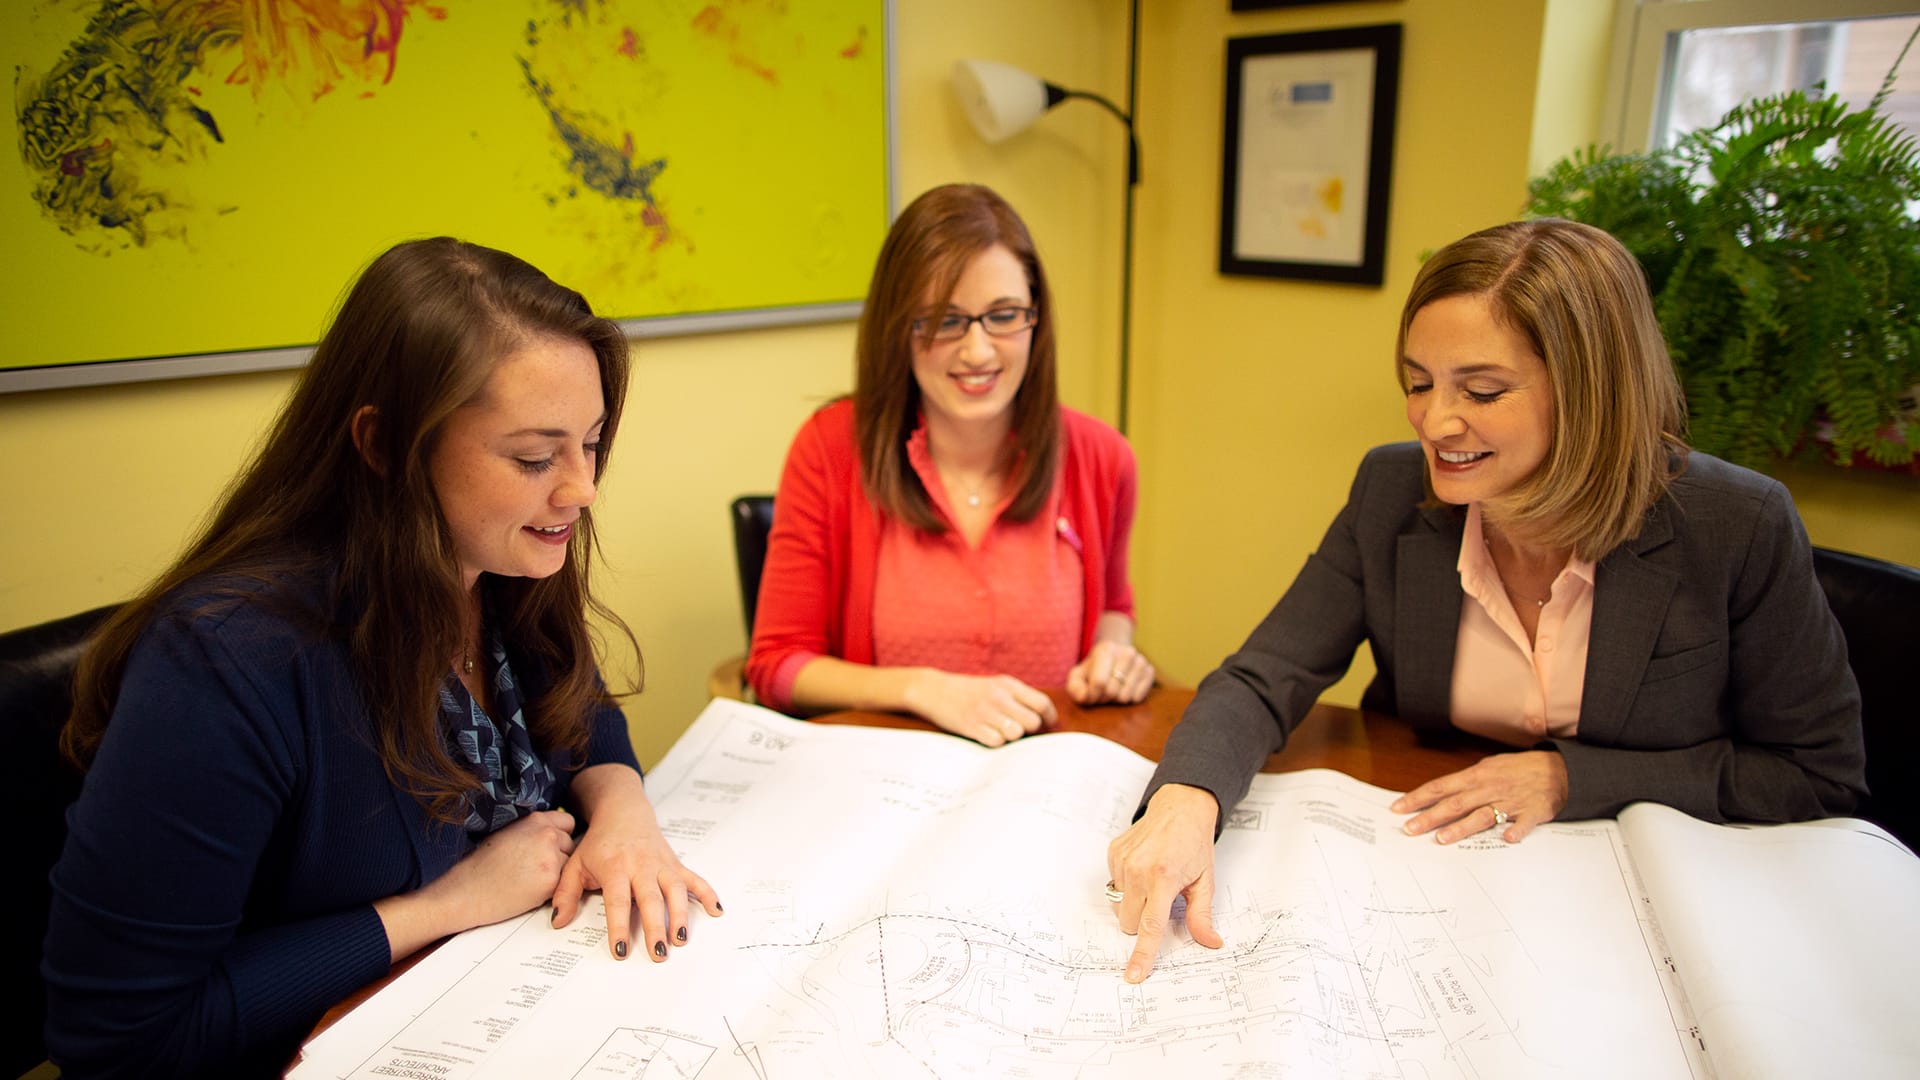 "Marti Ilg, who earned her degree from SNHU in 2014, sitting at a table with two other women pointing out a detail on  a large property map covering the table."